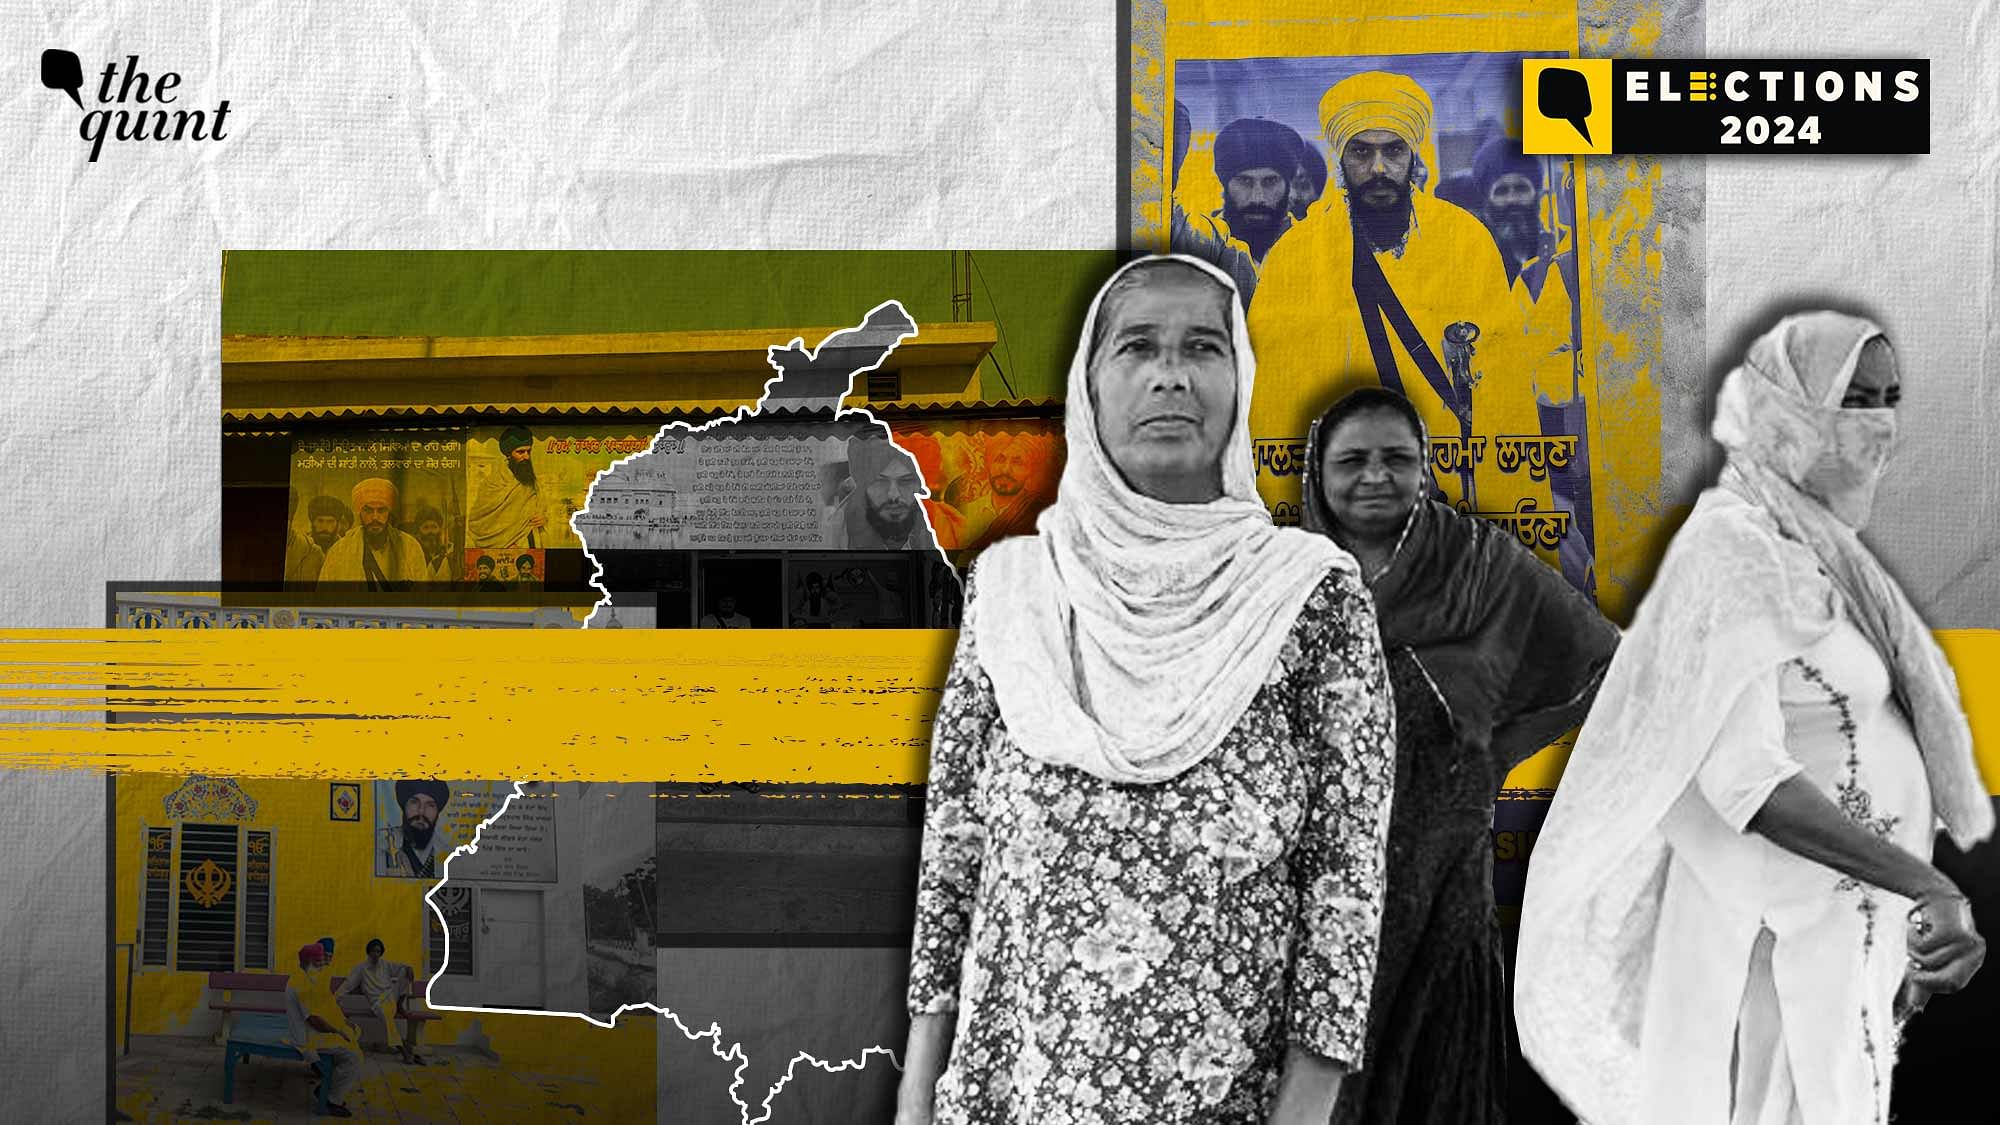 <div class="paragraphs"><p>As Punjab goes to polls in the last phase of the Lok Sabha elections, jailed Sikh leader Amritpal Singh is contesting from the Khadoor Sahib as an Independent candidate. While he is in a prison in Assam, his parents are campaigning for him in Punjab.</p></div>